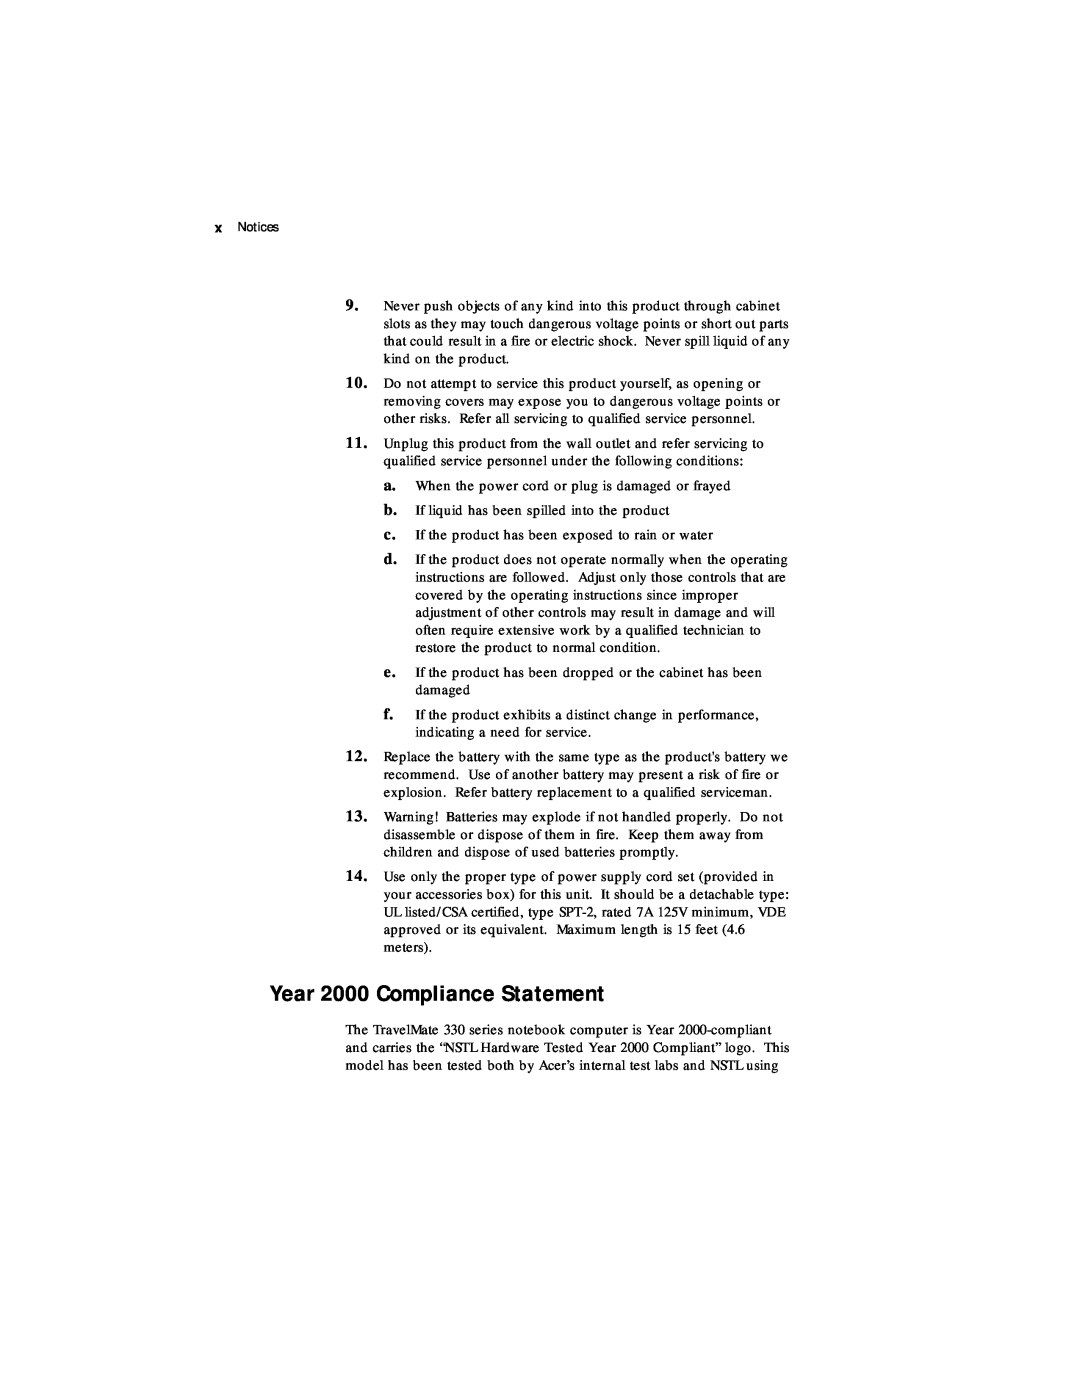 Acer 330 Series manual Year 2000 Compliance Statement 